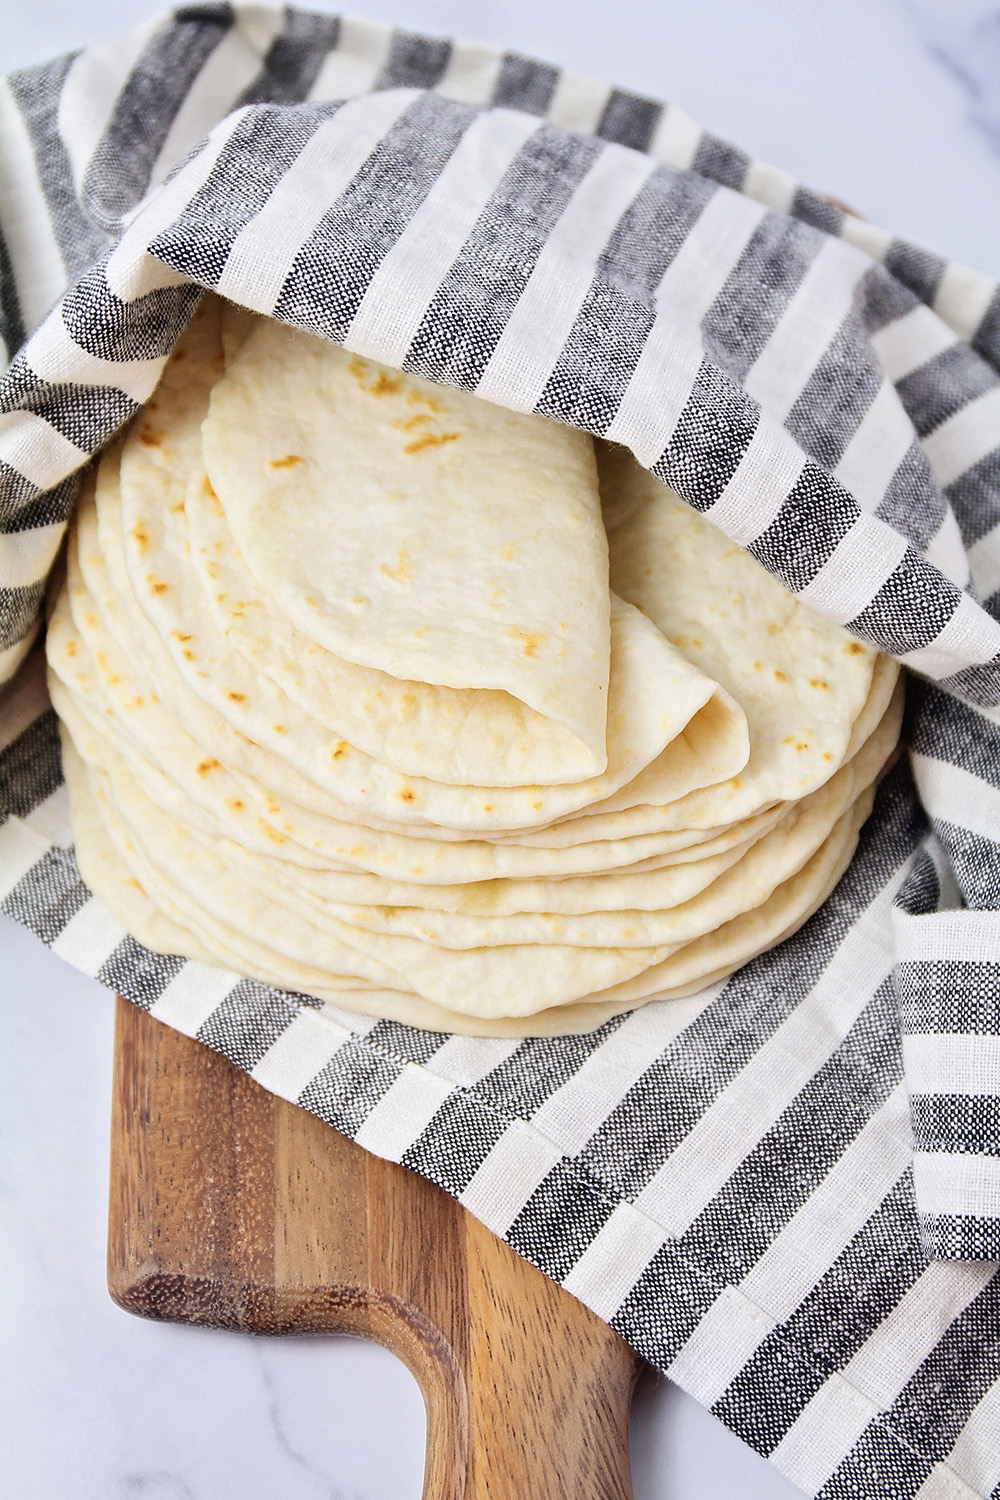 These soft homemade flour tortillas are perfect for tacos, enchiladas, burritos, and more! They're so delicious and so easy to make!